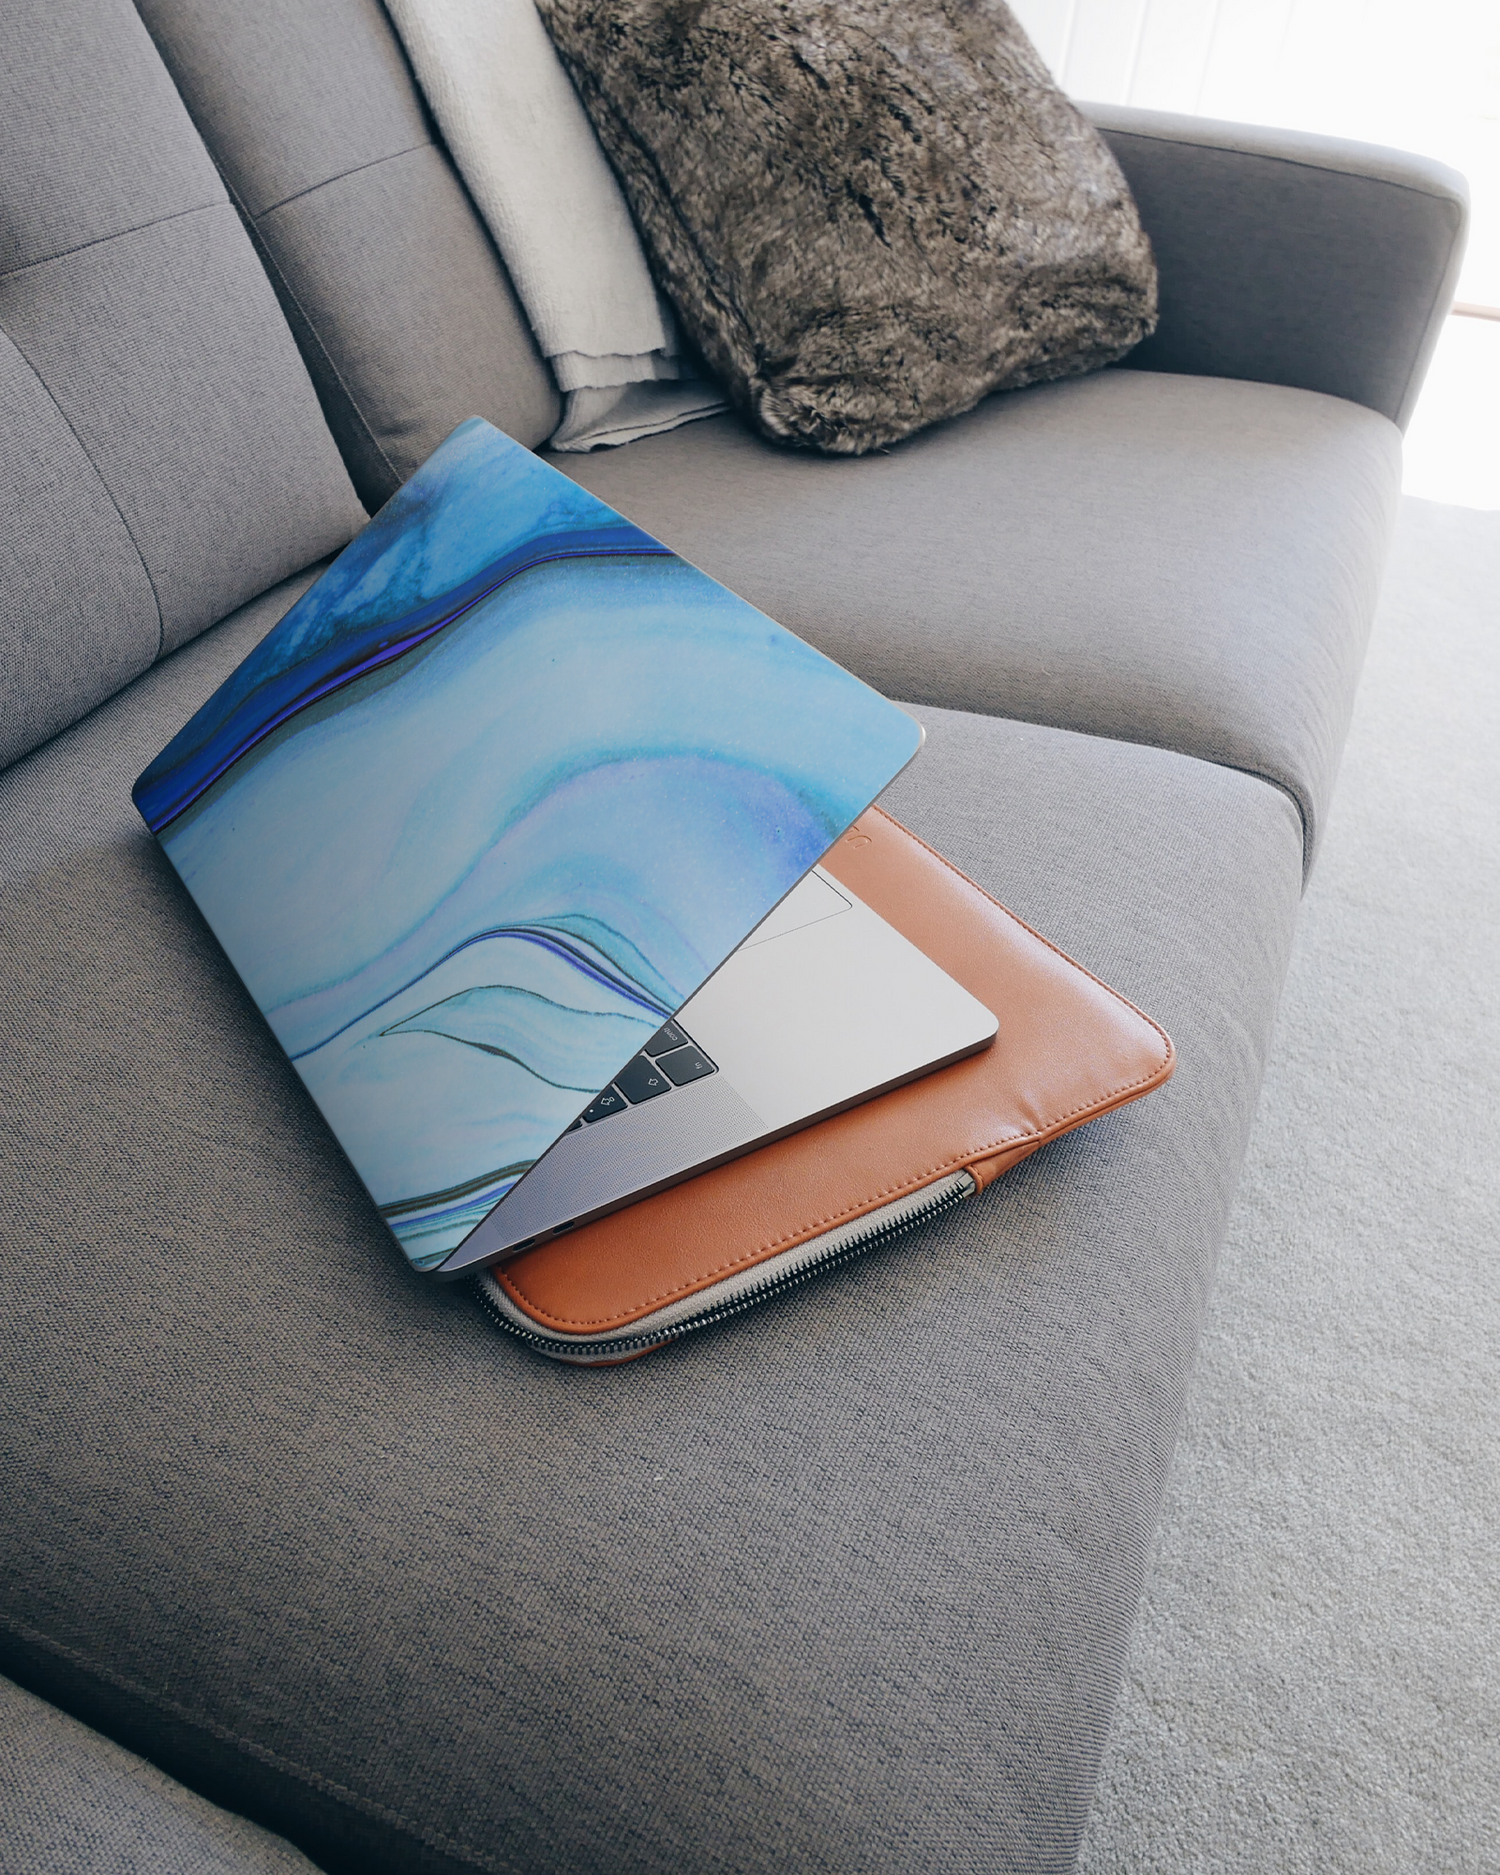 Cool Blues Laptop Skin for 15 inch Apple MacBooks on a couch